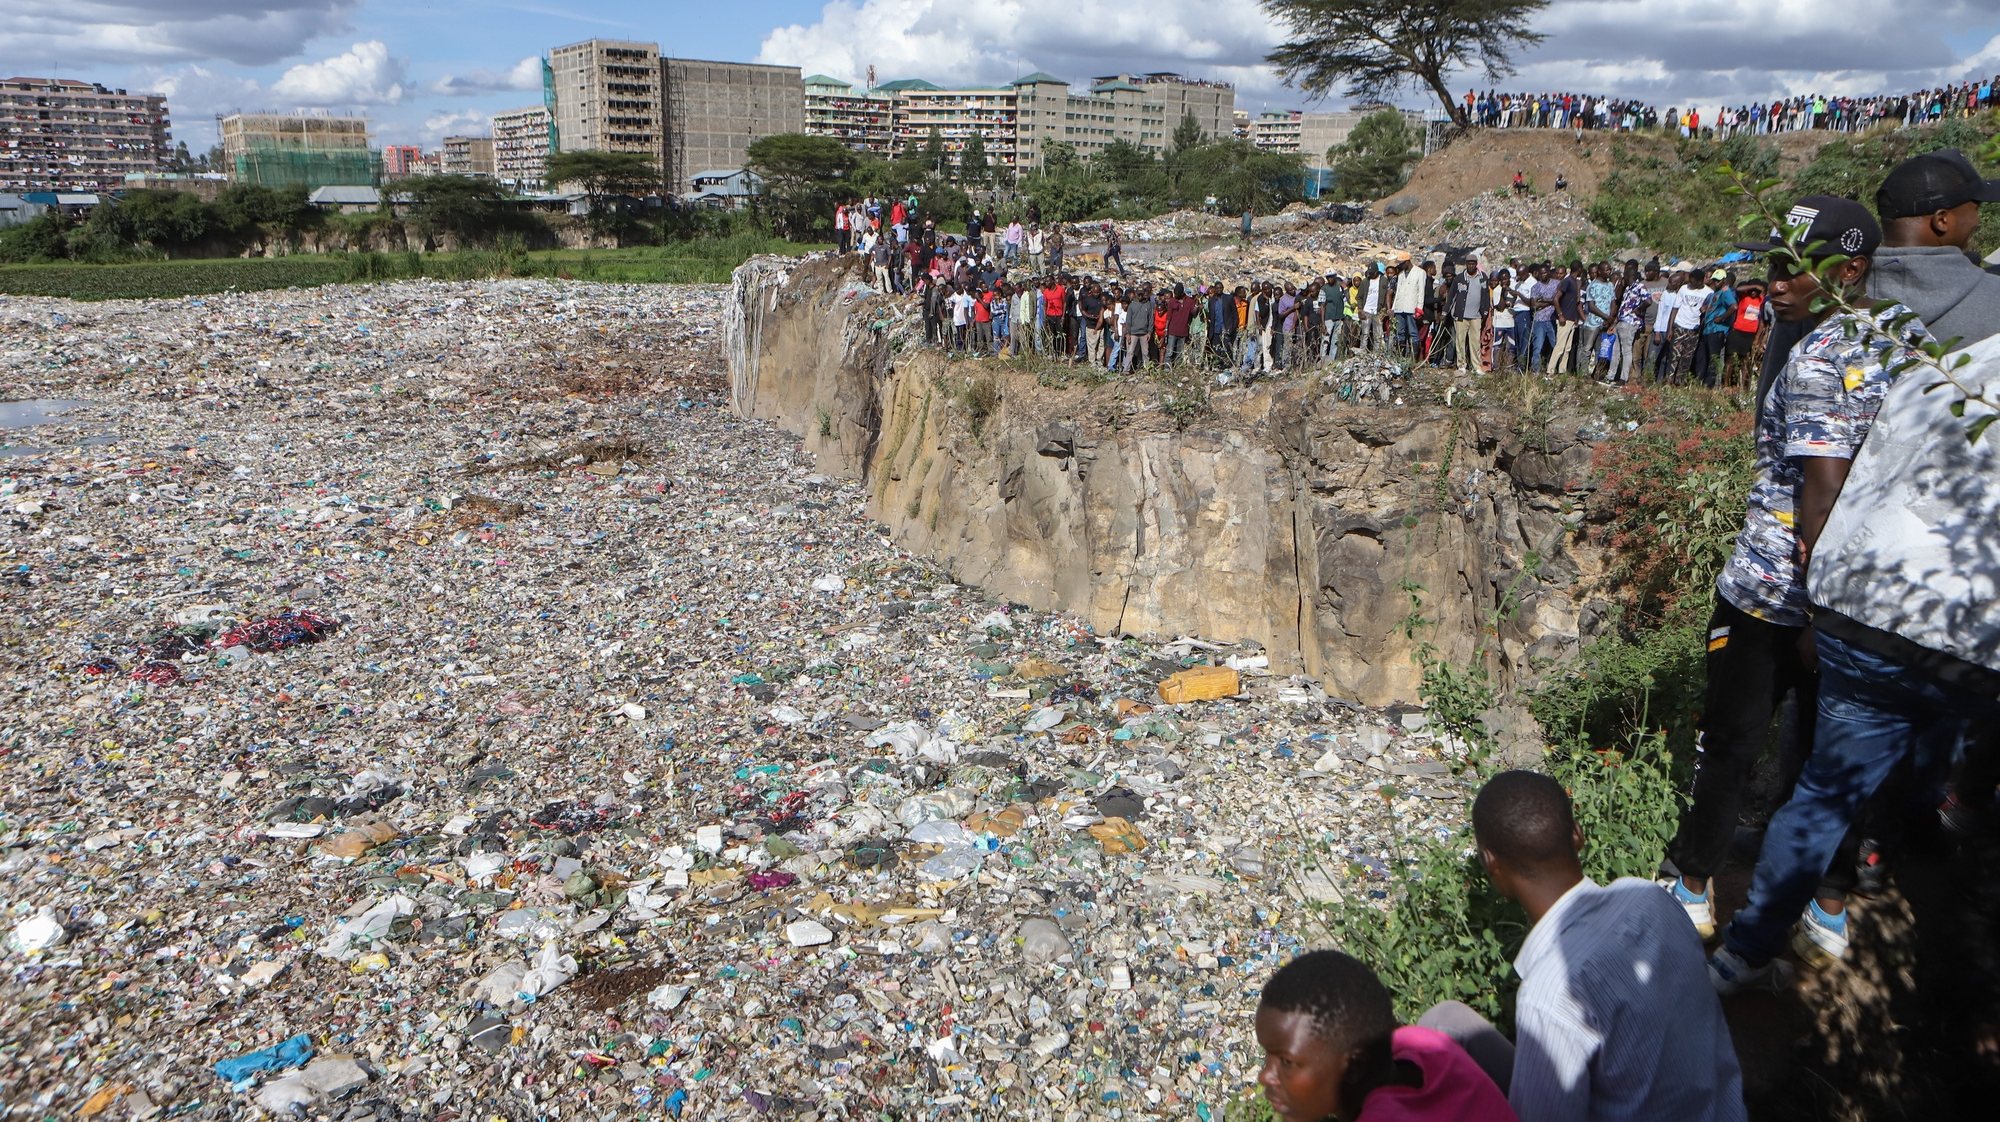 epa11474629 Onlookers watch as bodies wrapped in bags are being retrieved from inside a quarry turned into a dump site at Embakasi area in Nairobi, Kenya, 12 July 2024. Police stated that six severely mutilated female bodies, in various stages of decomposition and wrapped in nylon bags and ropes, were recovered from the former quarry near Mukuru Kwa Njenga slum in Nairobi. Police said the area has been declared a crime scene and an investigation is underway.  EPA/STRINGER